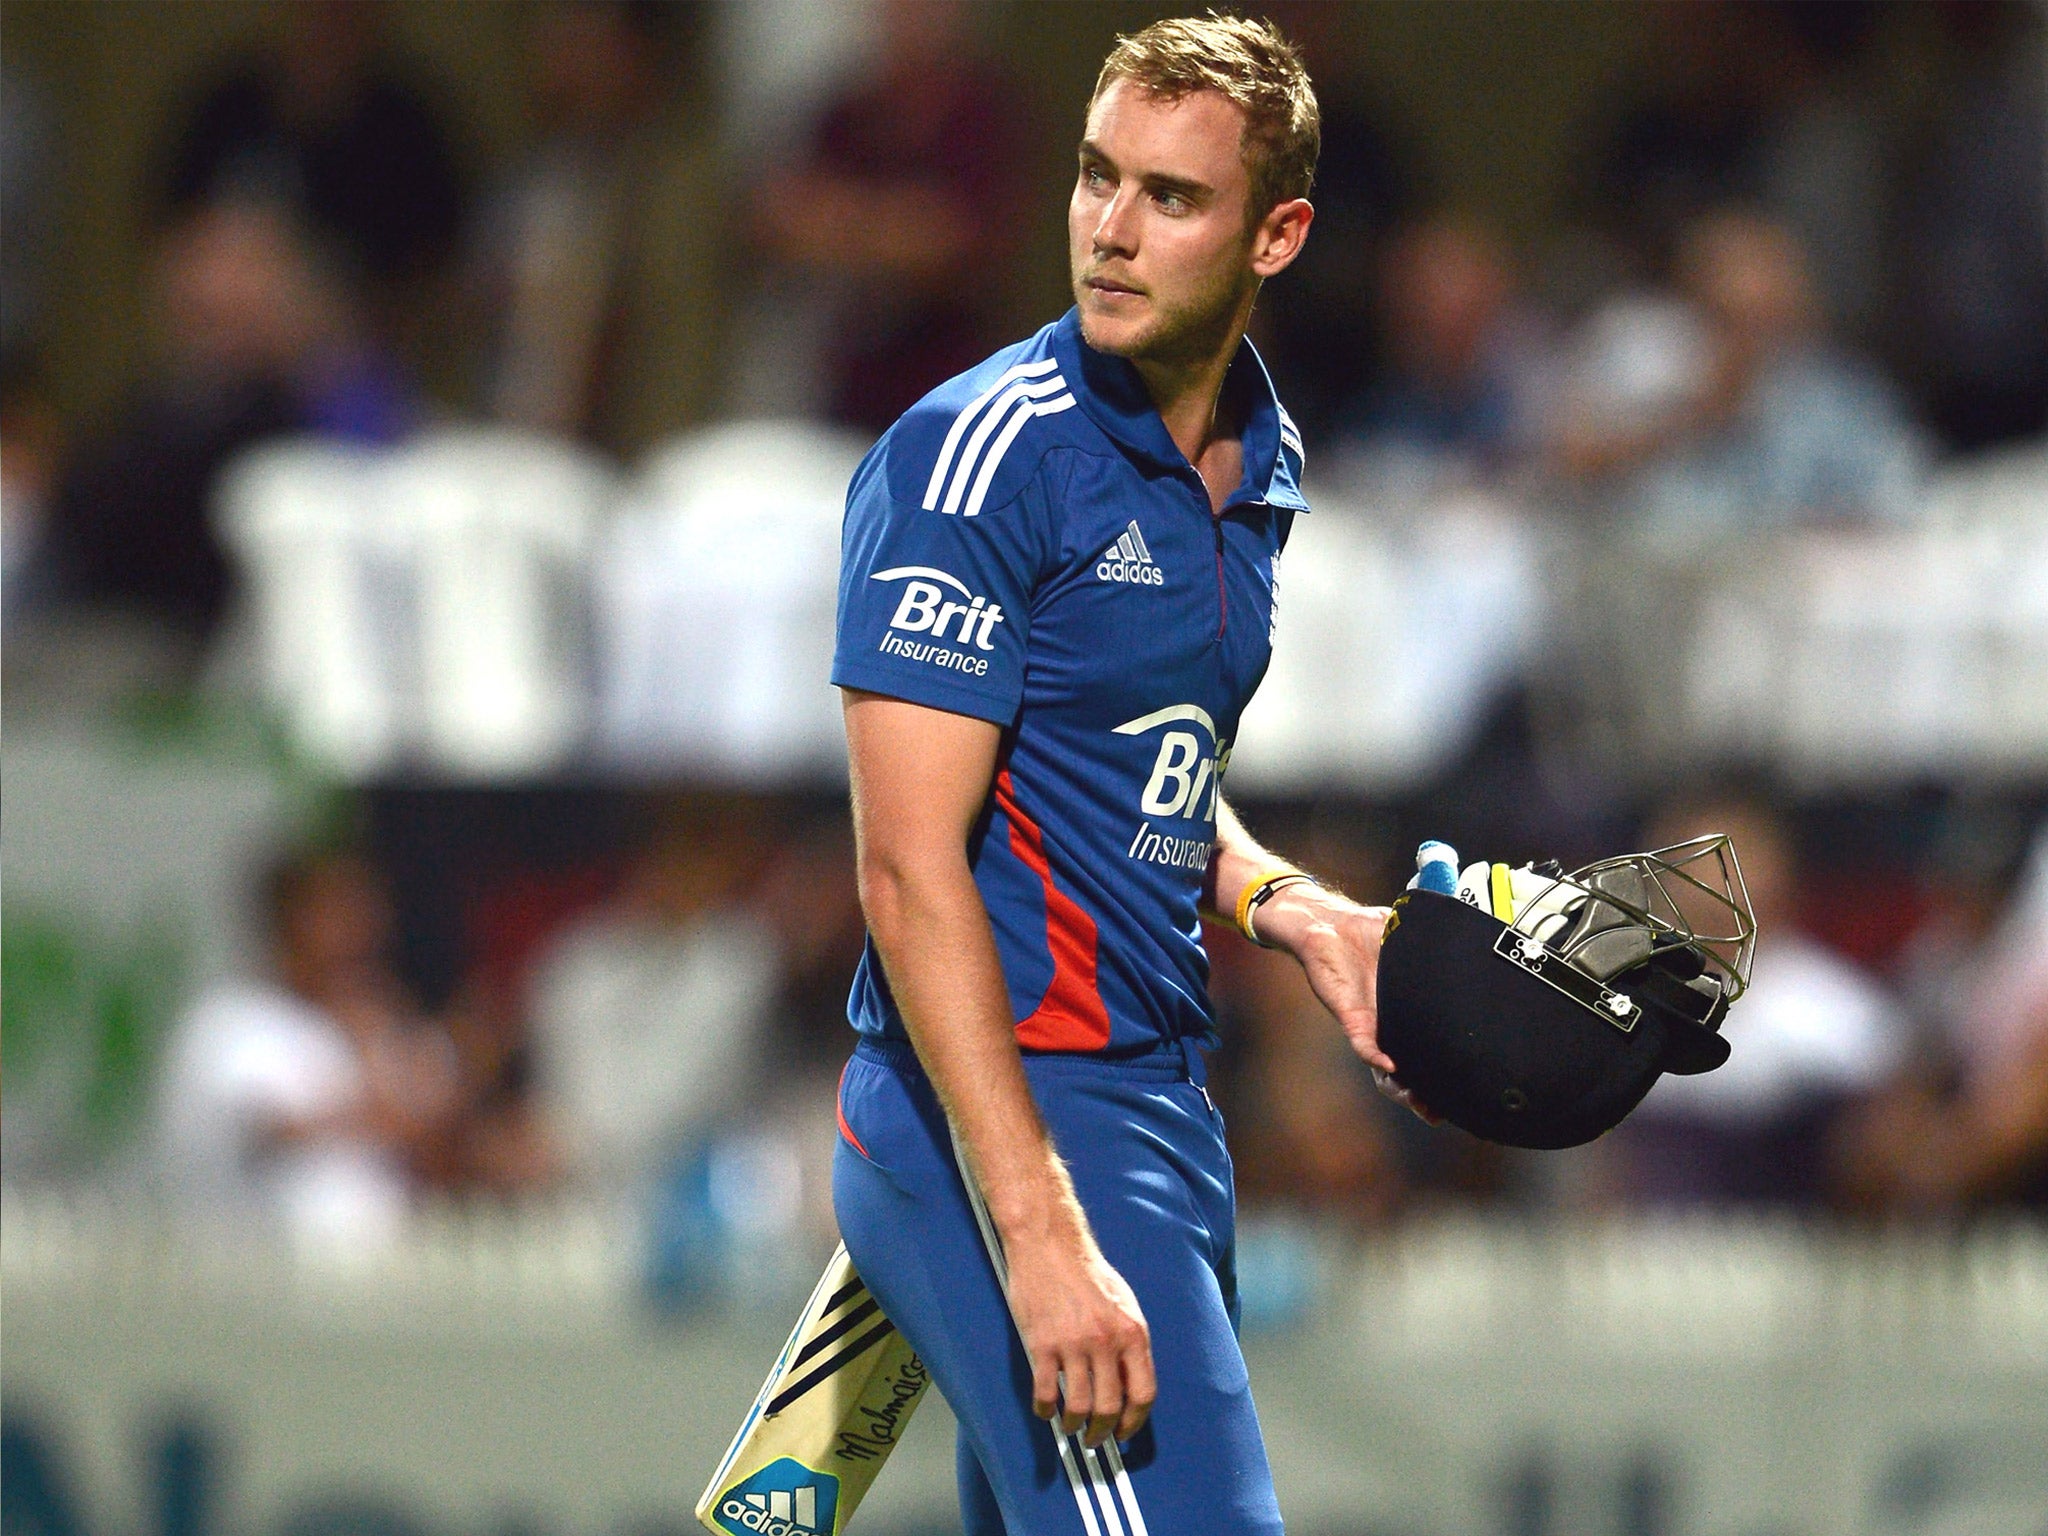 Broad: 'It will be an exciting third game, both sides will go hell for leather'